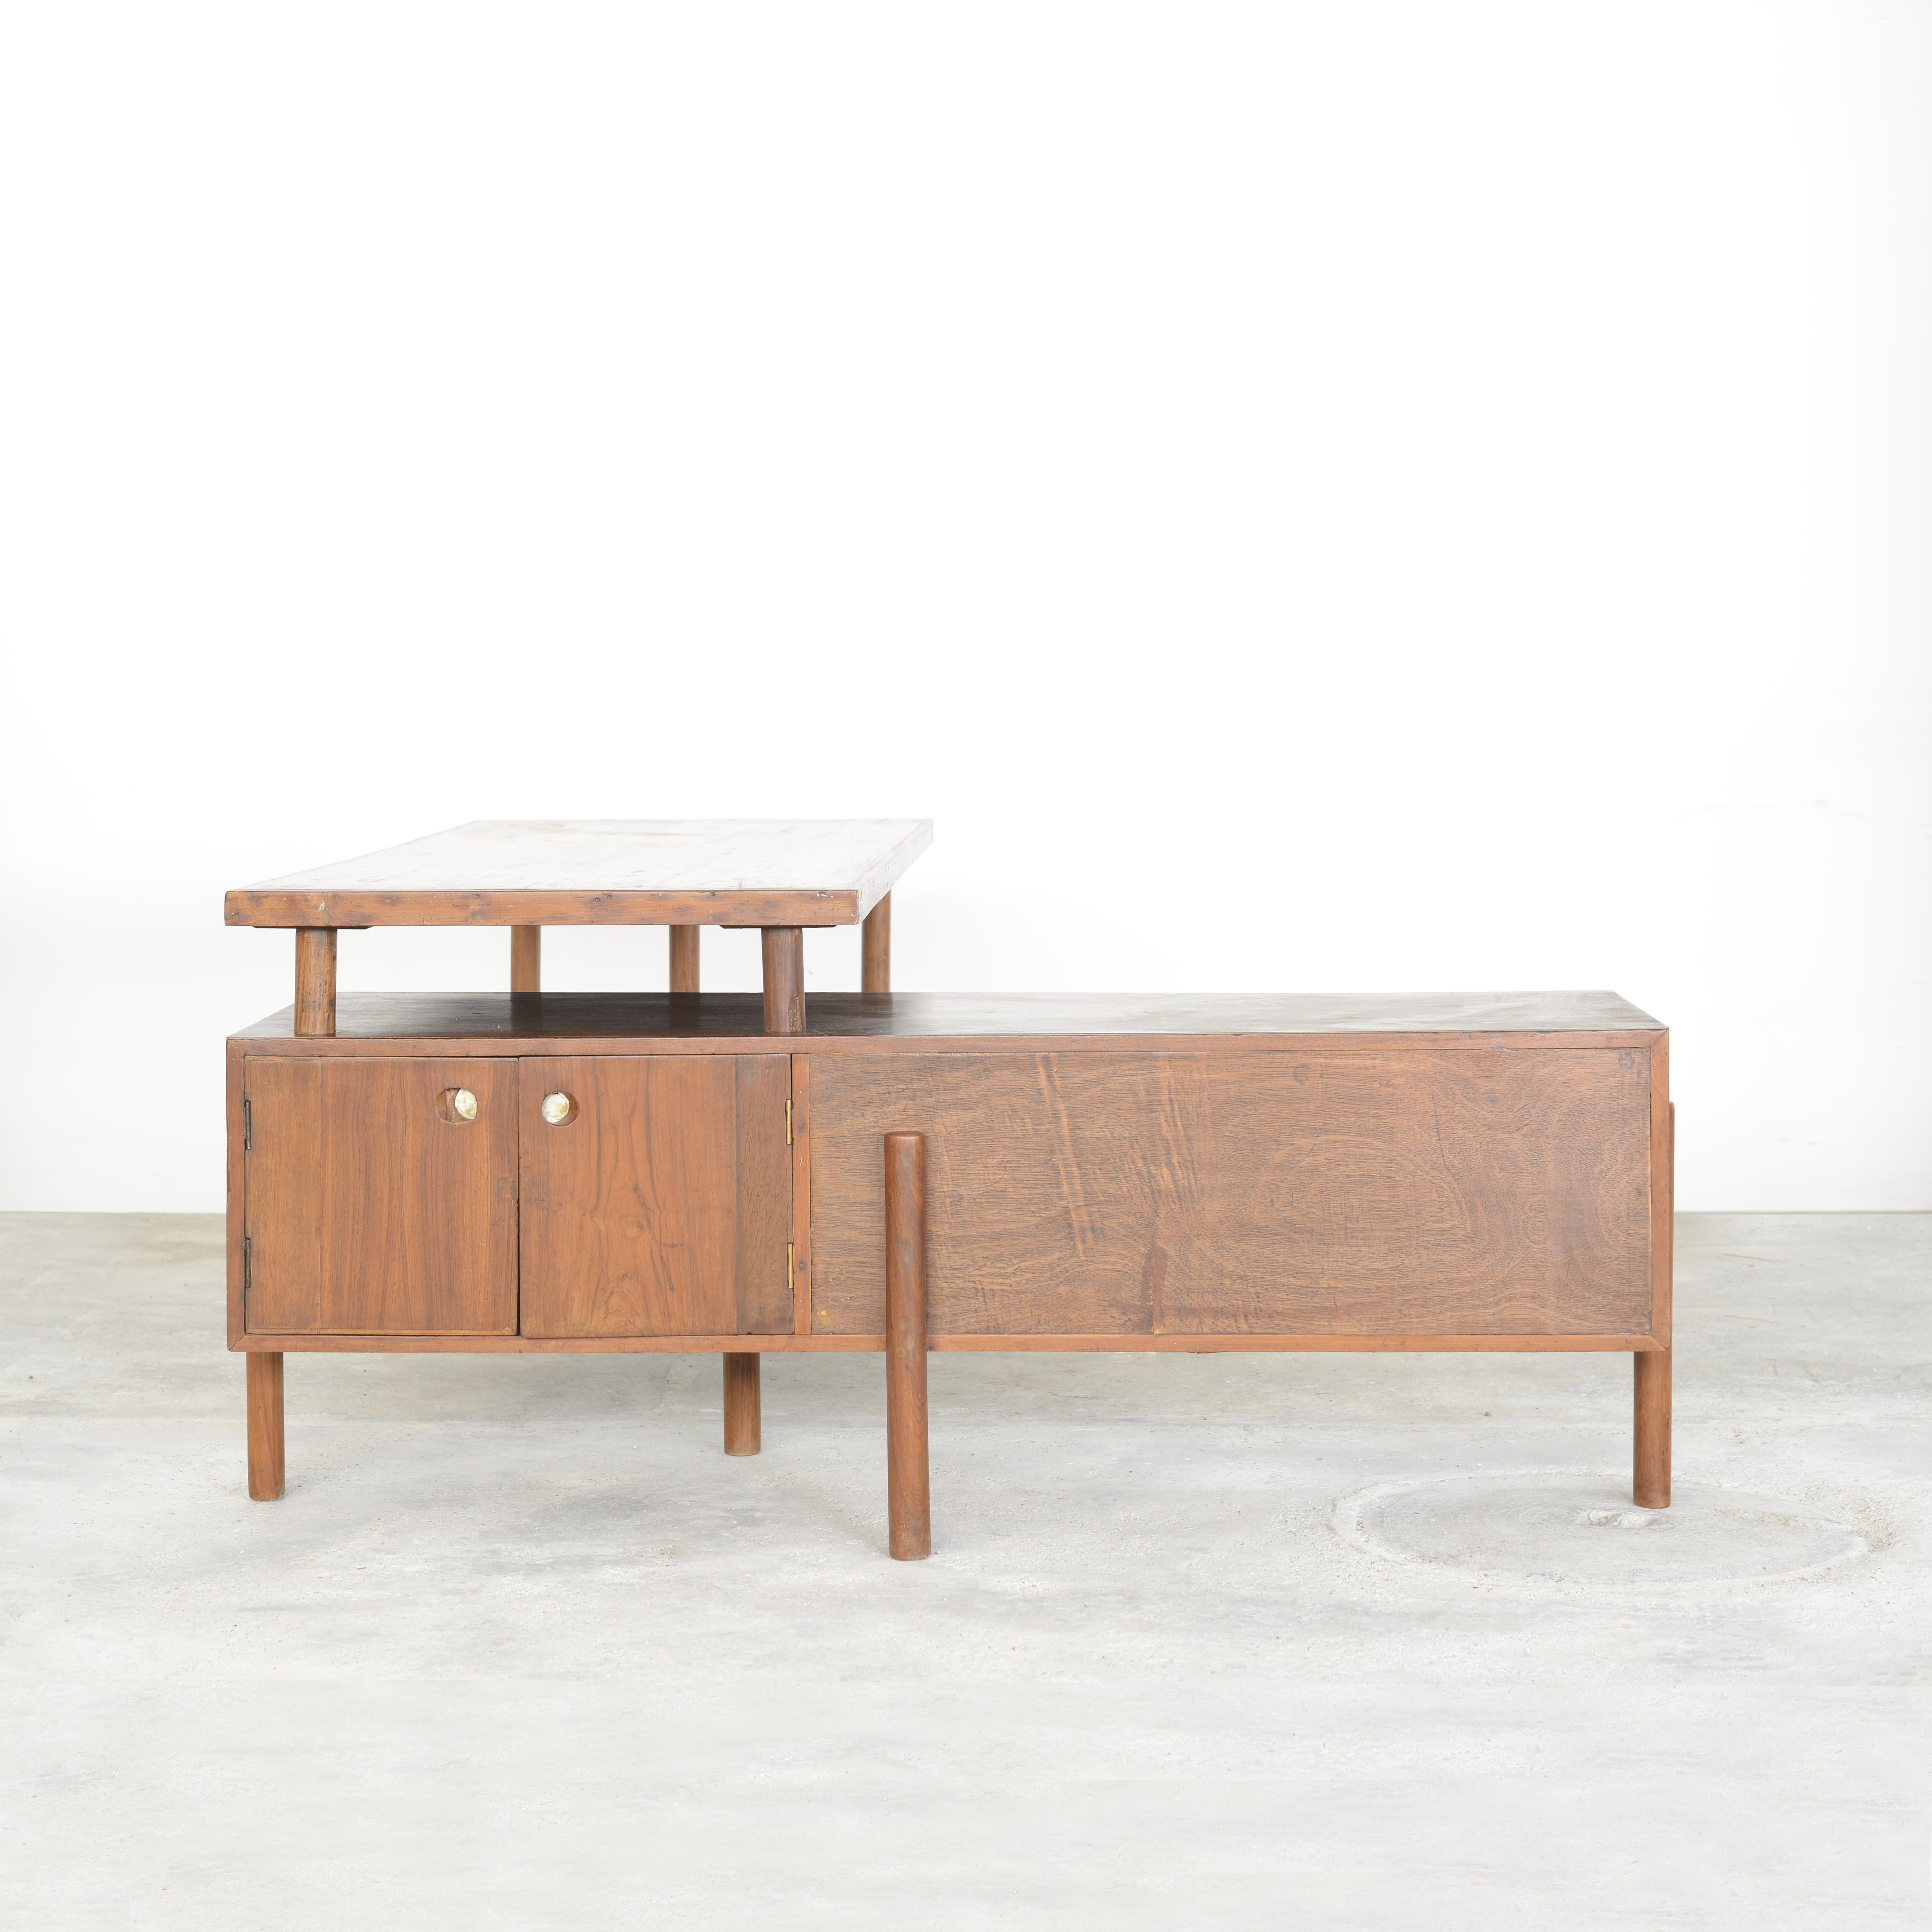 Pierre Jeanneret PJ-BU-14-A Executive Desk / Authentic Mid-Century Modern In Good Condition For Sale In Zürich, CH